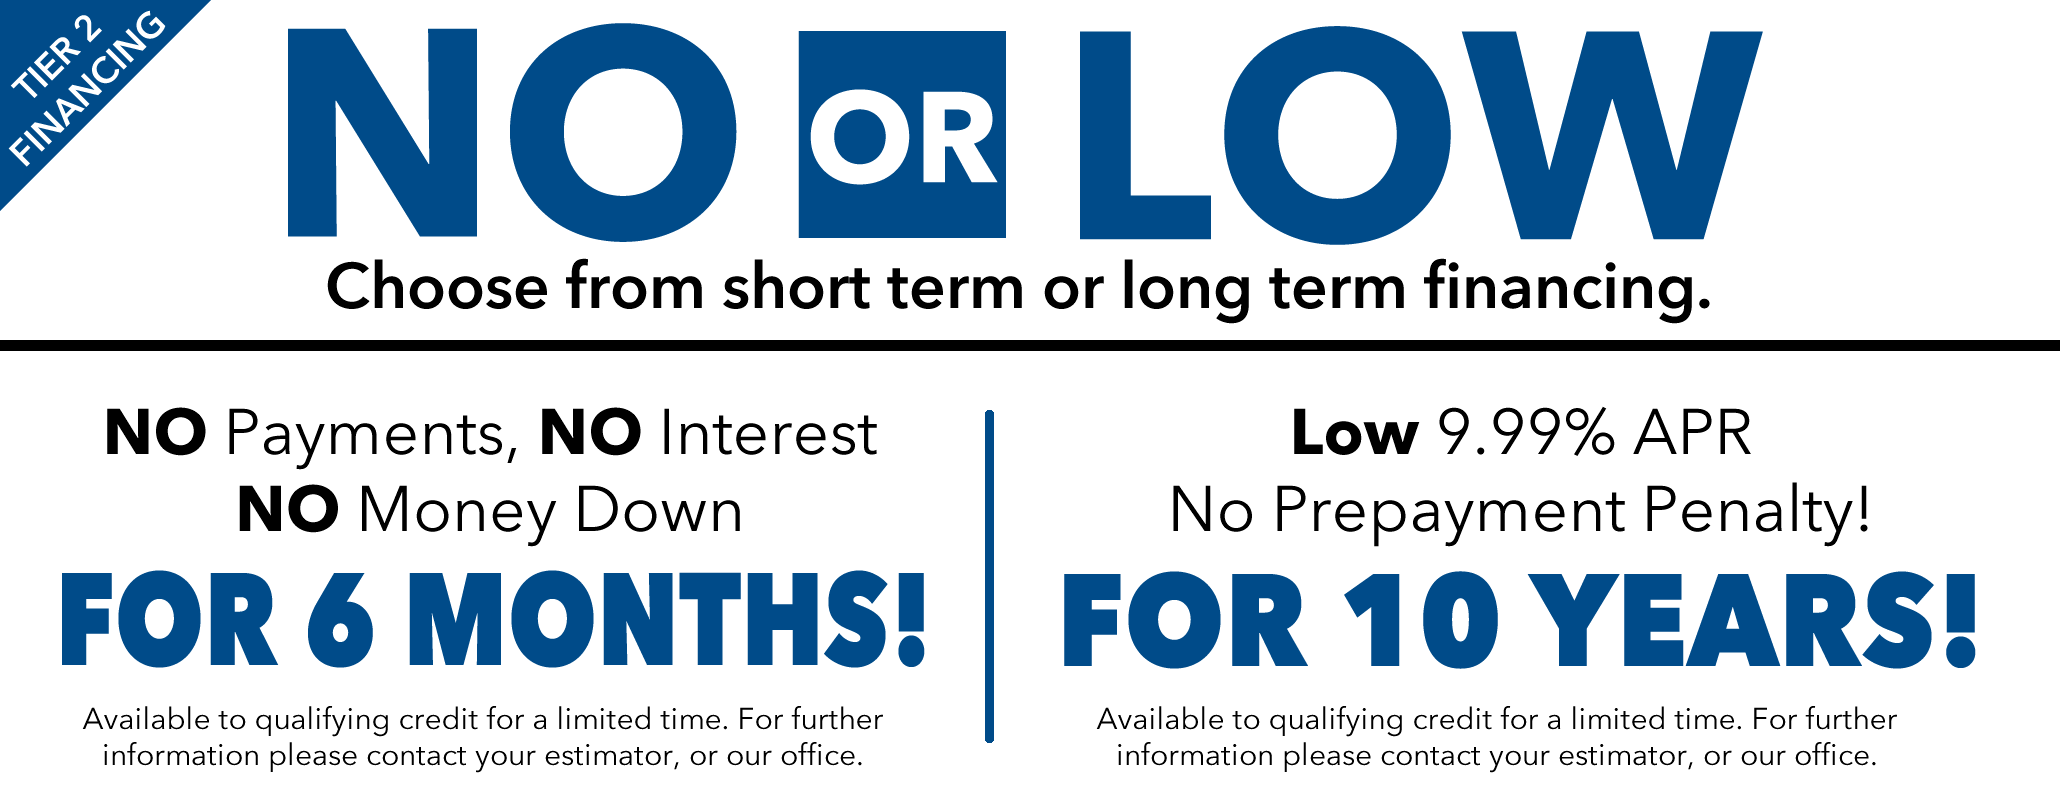 NO or LOW? Choose from short term or long term financing. 6 Month Same-as-cash or 9.99% for up to 10 years!